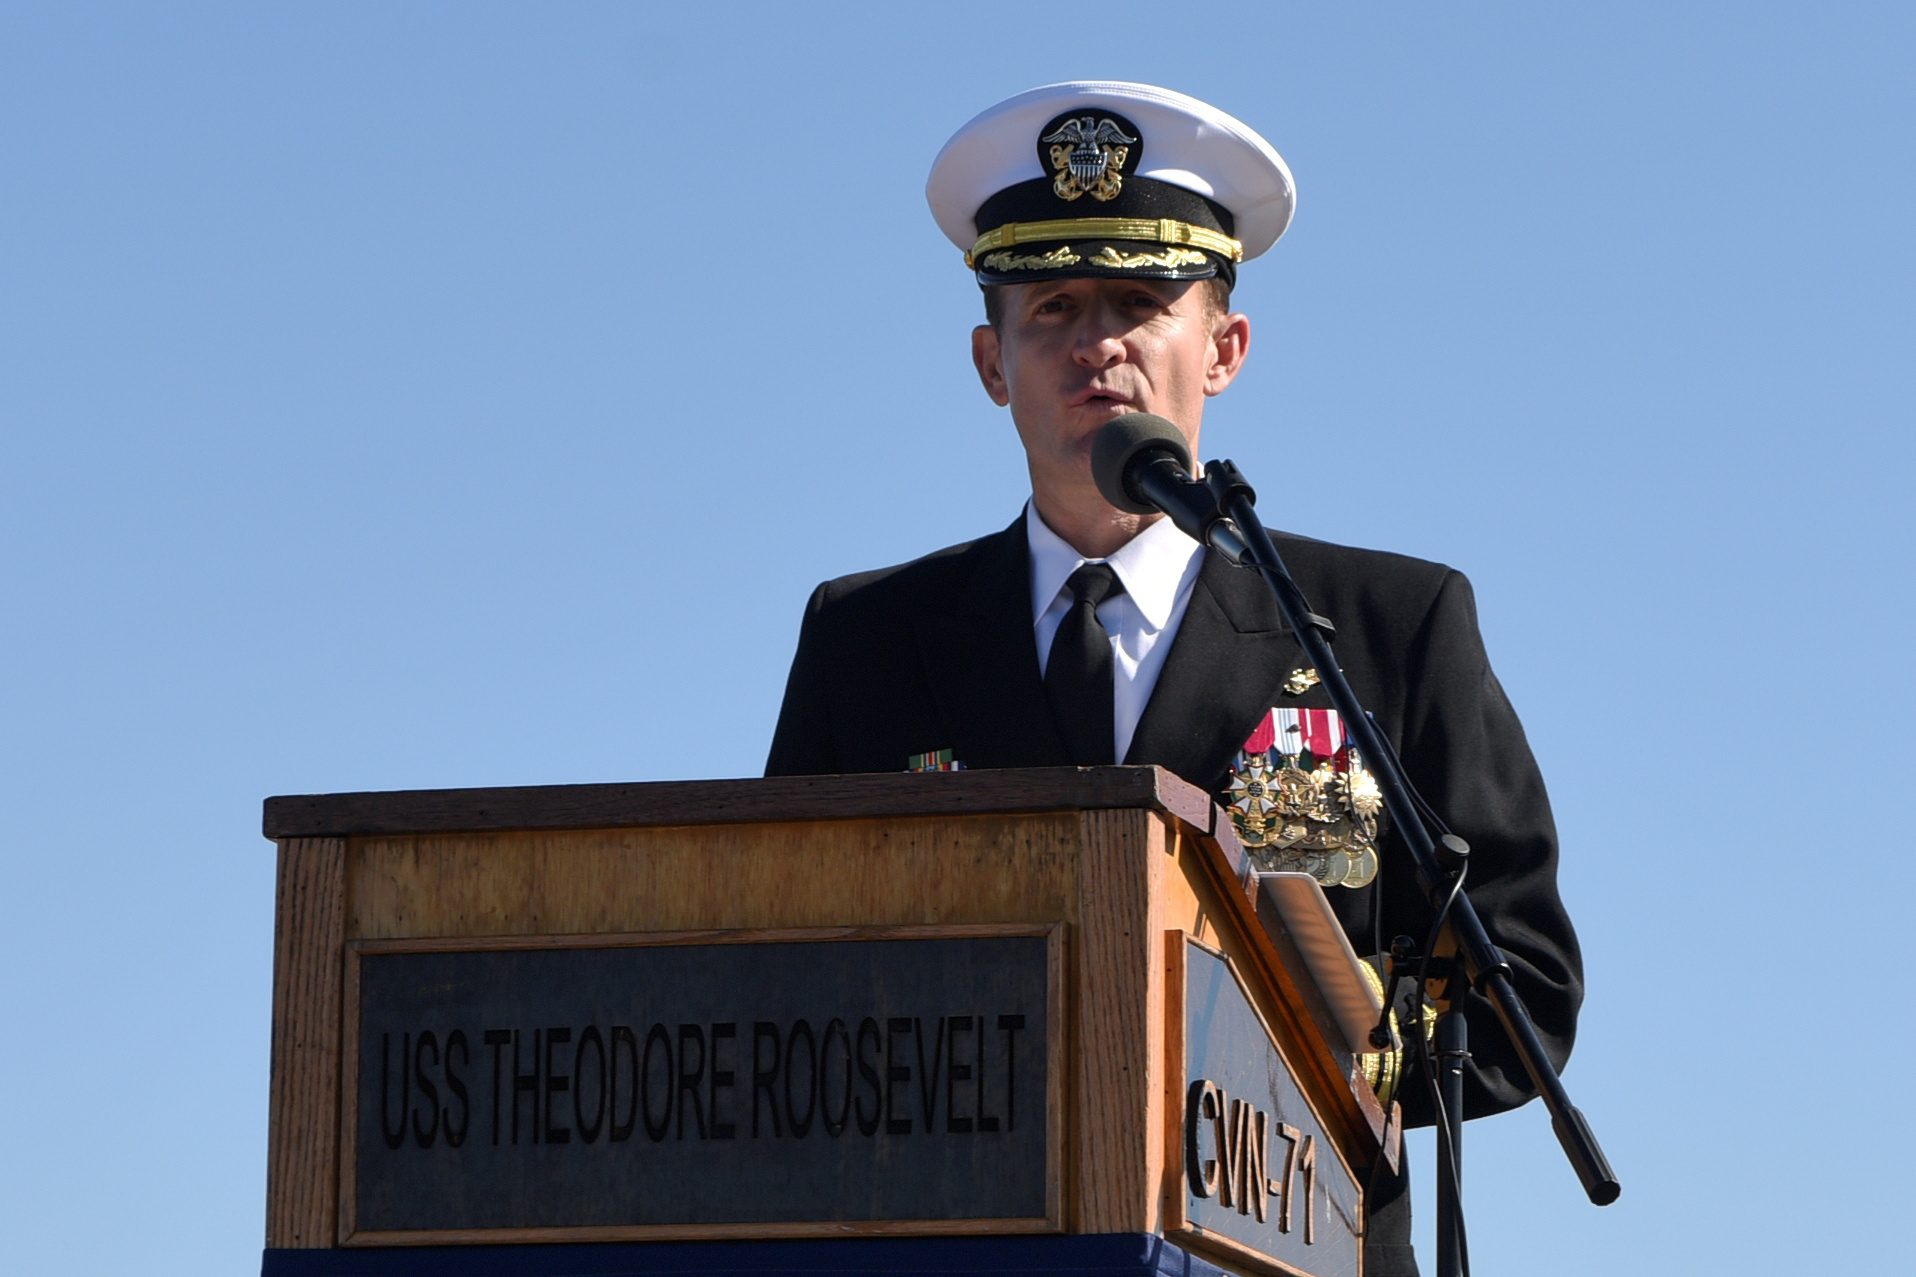 FILE PHOTO: Captain Brett Crozier addresses the crew for the first time as commanding officer of the aircraft carrier USS Theodore Roosevelt during a change of command ceremony on the ship’s flight deck in San Diego, California, U.S. November 1, 2019. Picture taken November 1, 2019. U.S. Navy/Mass Communication Specialist 3rd Class Sean Lynch/Handout via REUTERS./File Photo